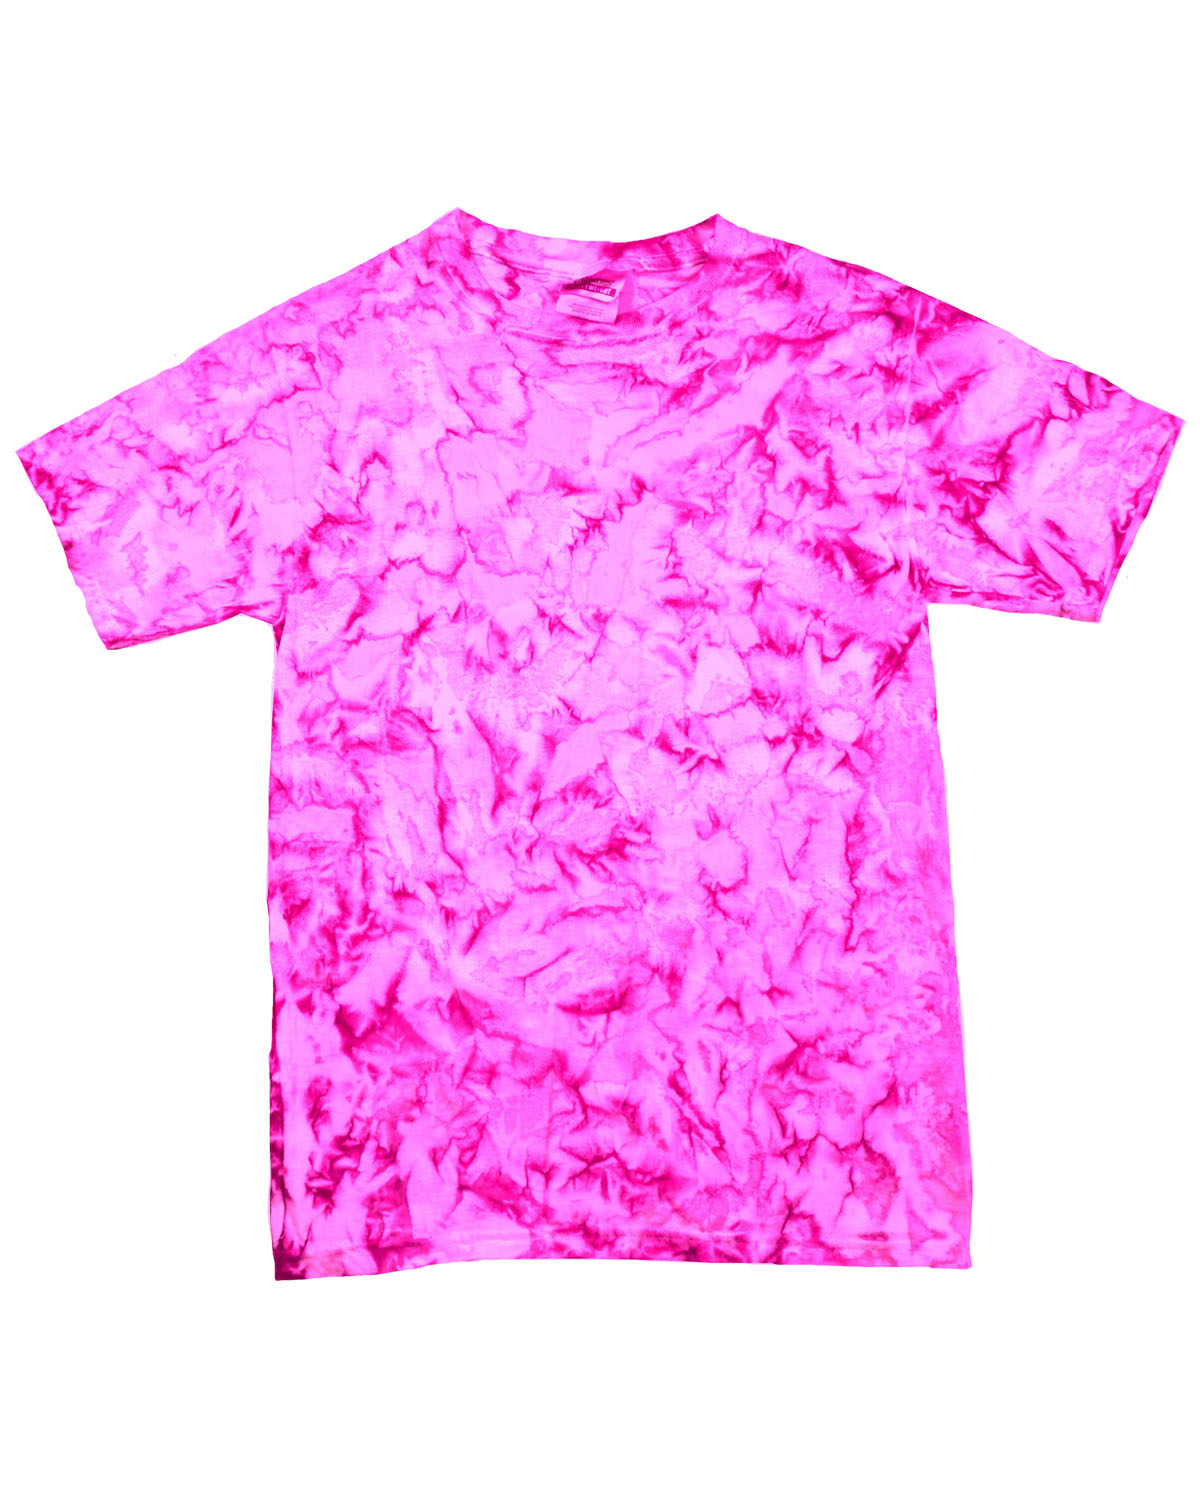 click to view CAMO PINK